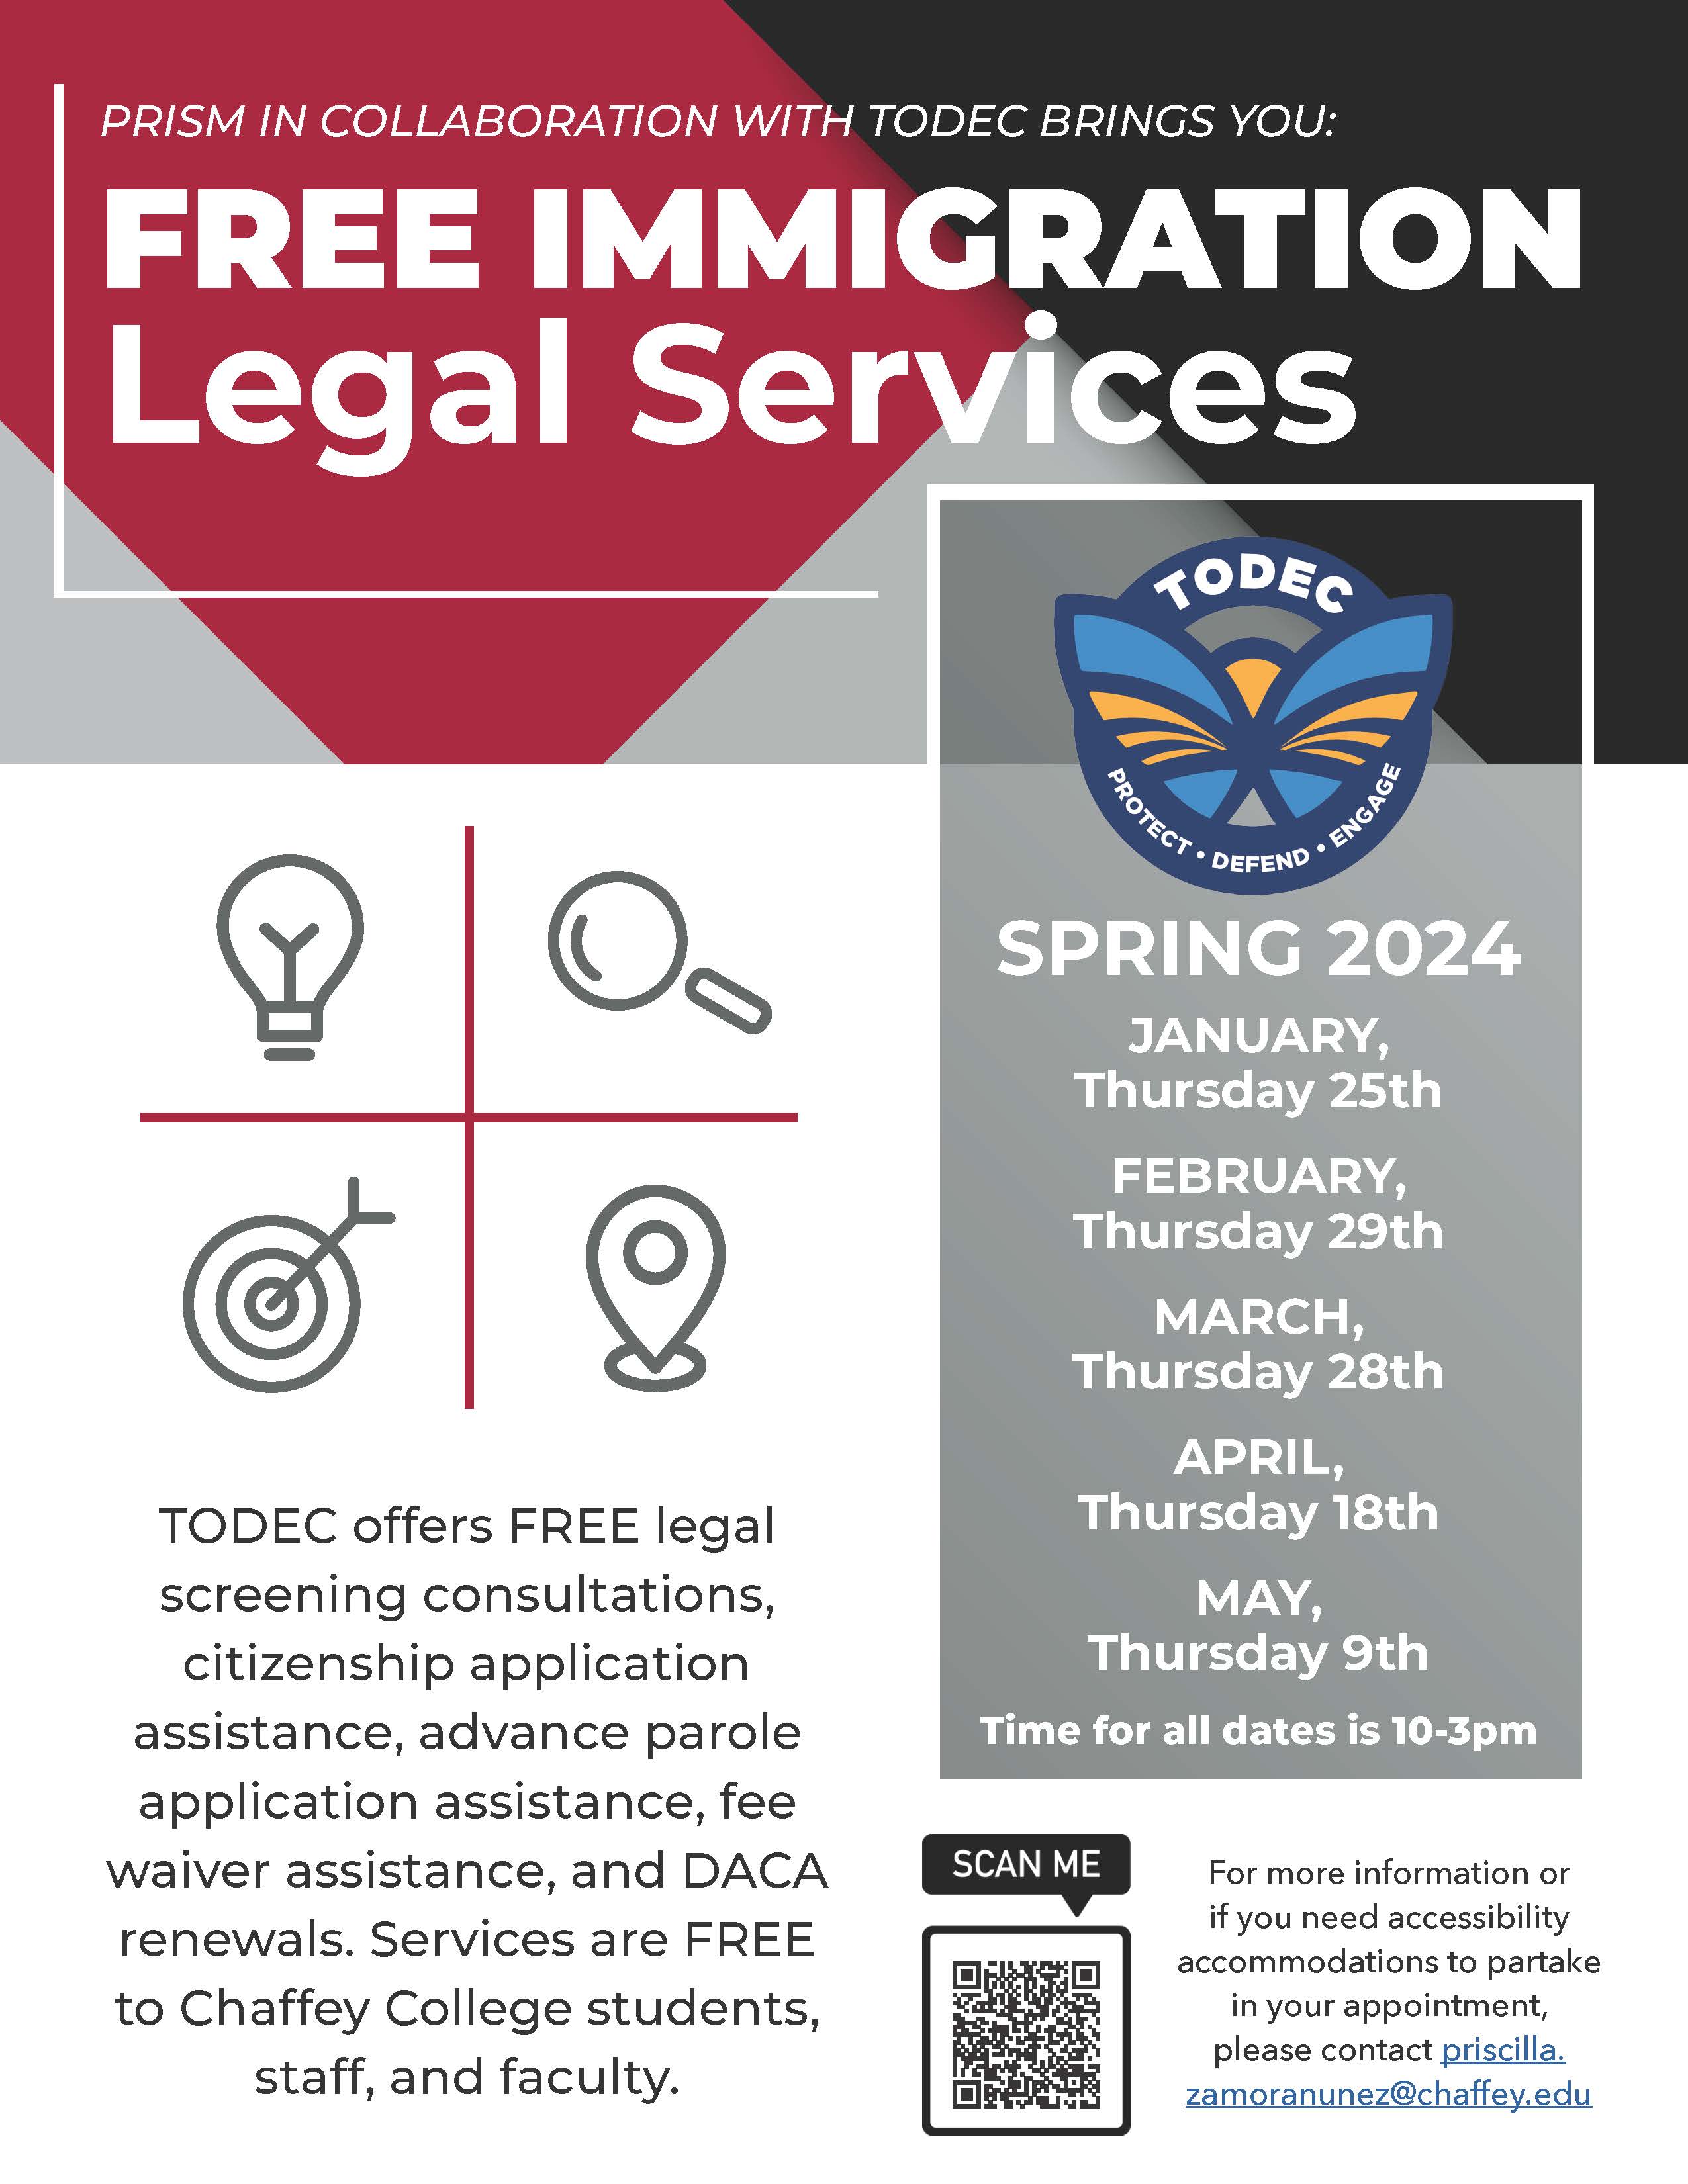 FREE IMMIGRATION Legal Services